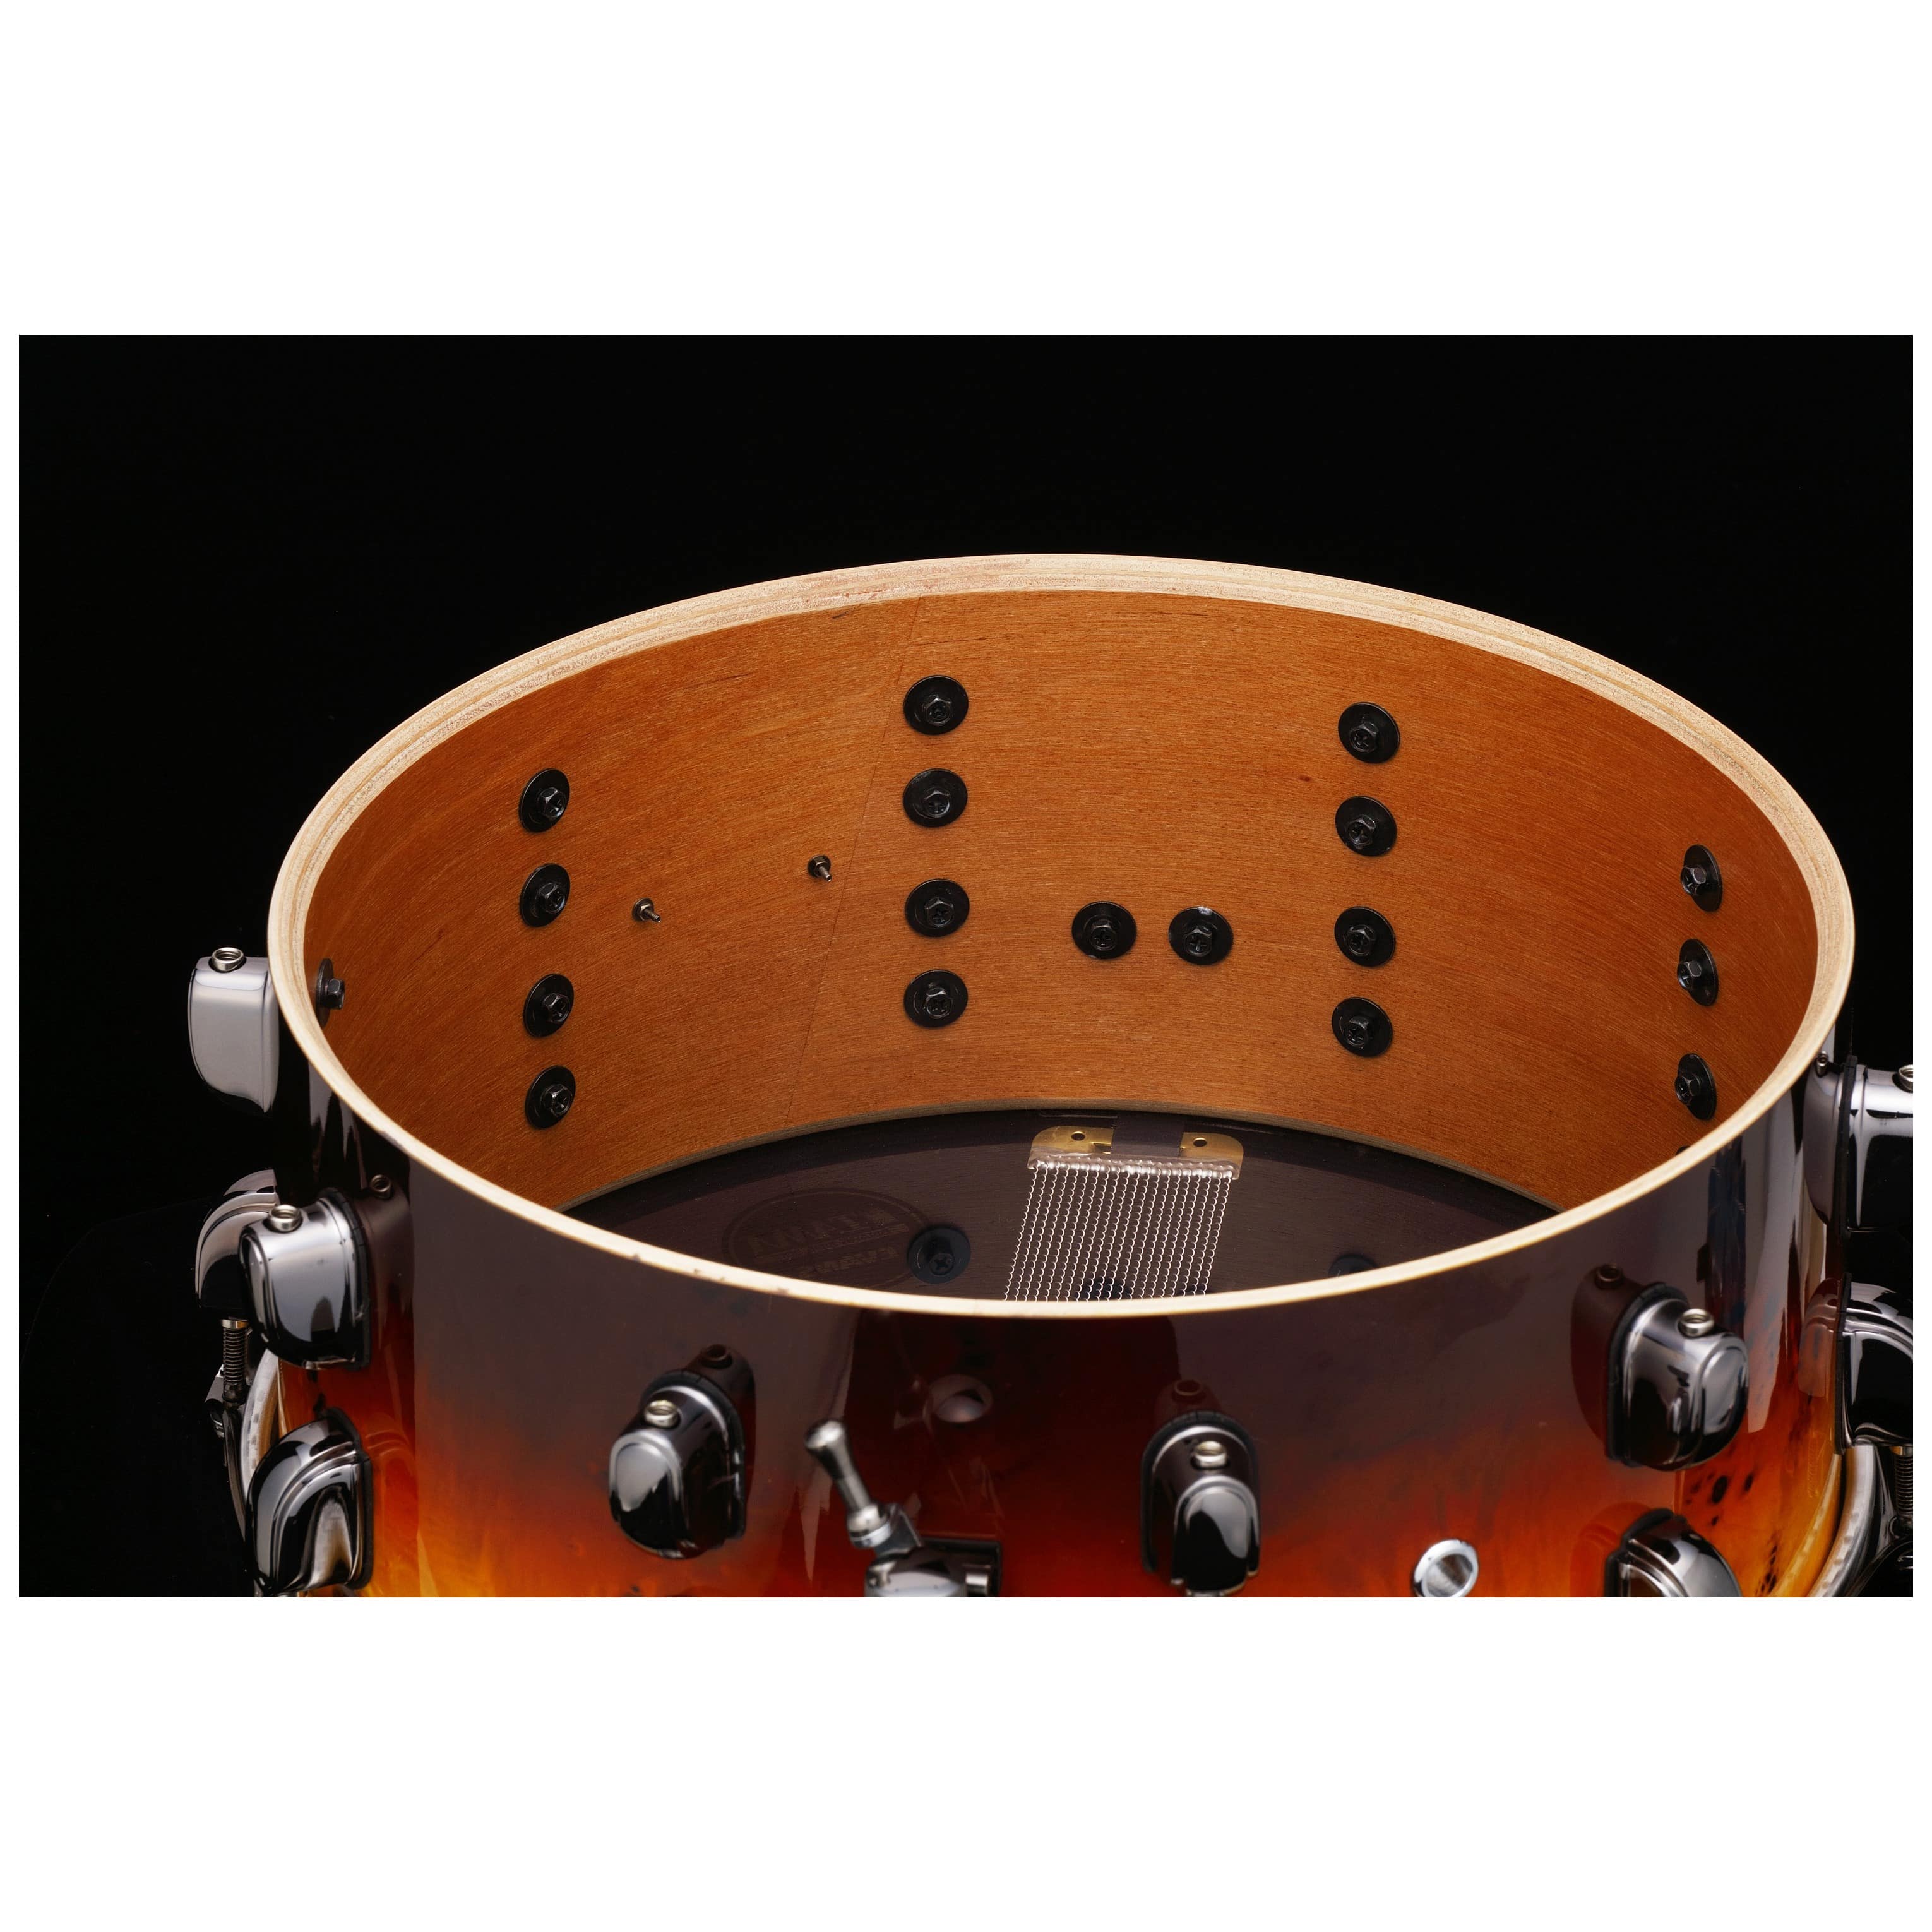 Tama LGK146-ASF Sound Lab Project Limited G-Kapur Snare Drum - 14" x 6" Amber Sunset Fade/Chrom HW 5